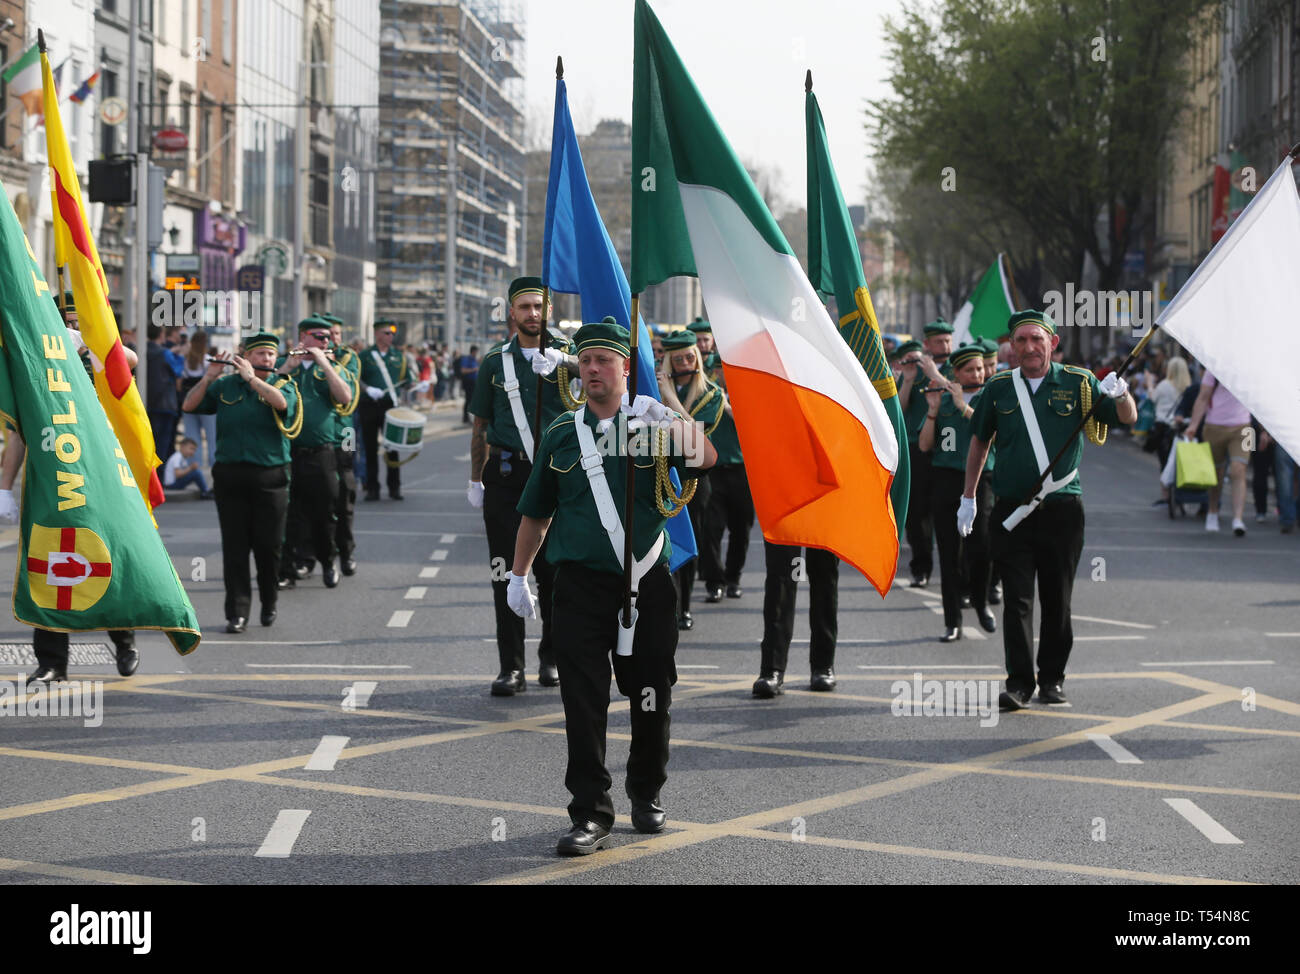 New IRA support group, Saoradh, parades through Dublin city centre in paramilitary uniforms, despite outrage over shooting dead of journalist Lyra McKee in Londonderry (Derry City) this week. Photo: Sam Boal/RollingNews.ie Stock Photo